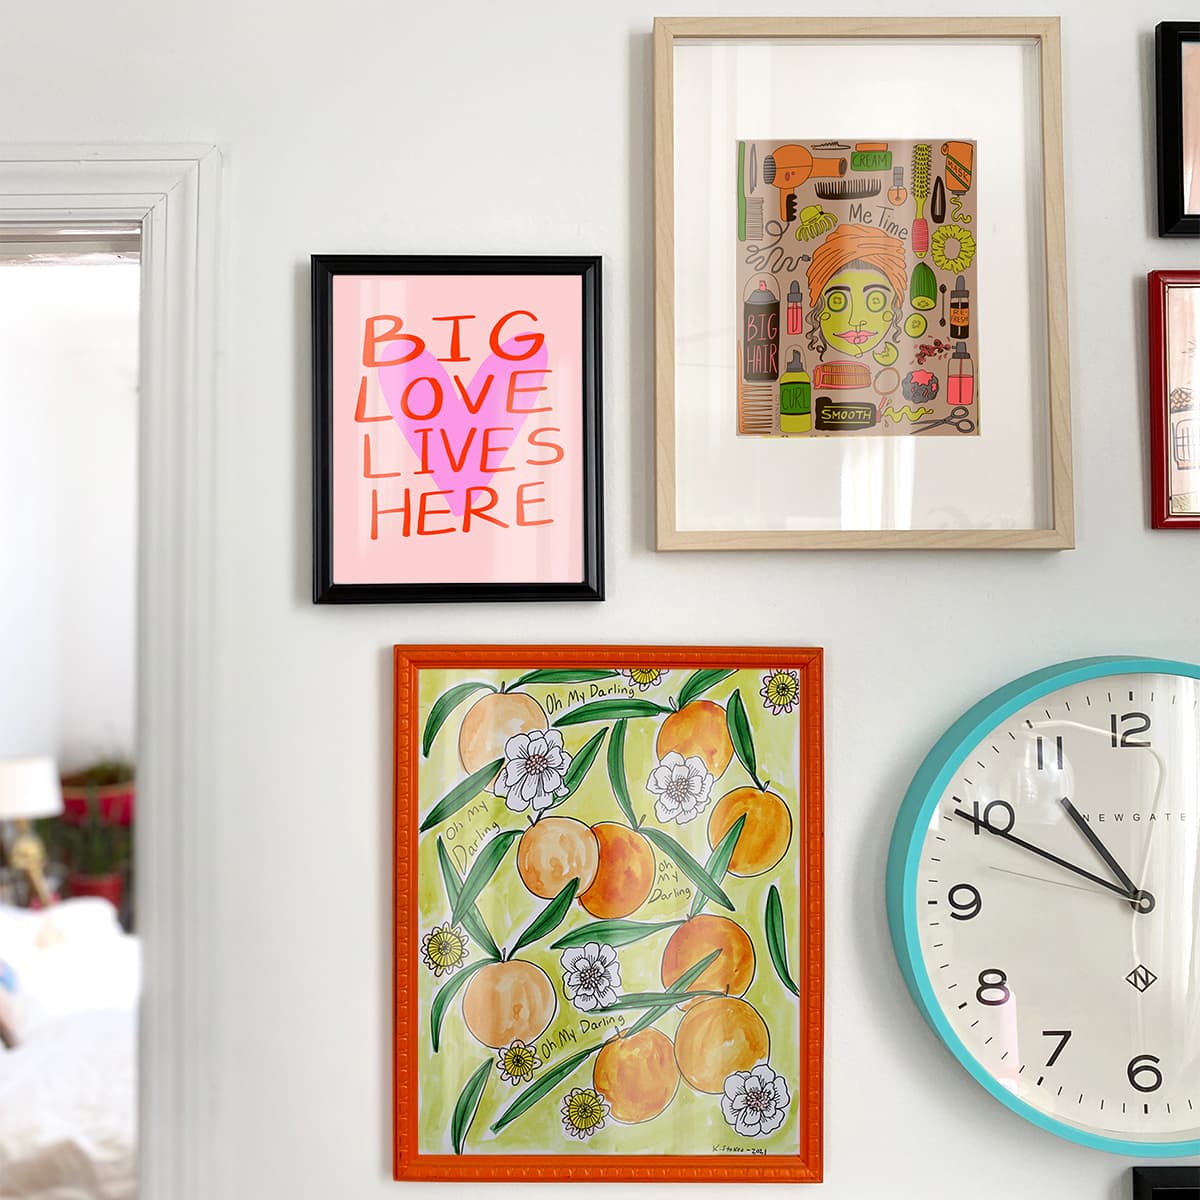 13 Unique Wall Art Ideas to Liven Up Your Home